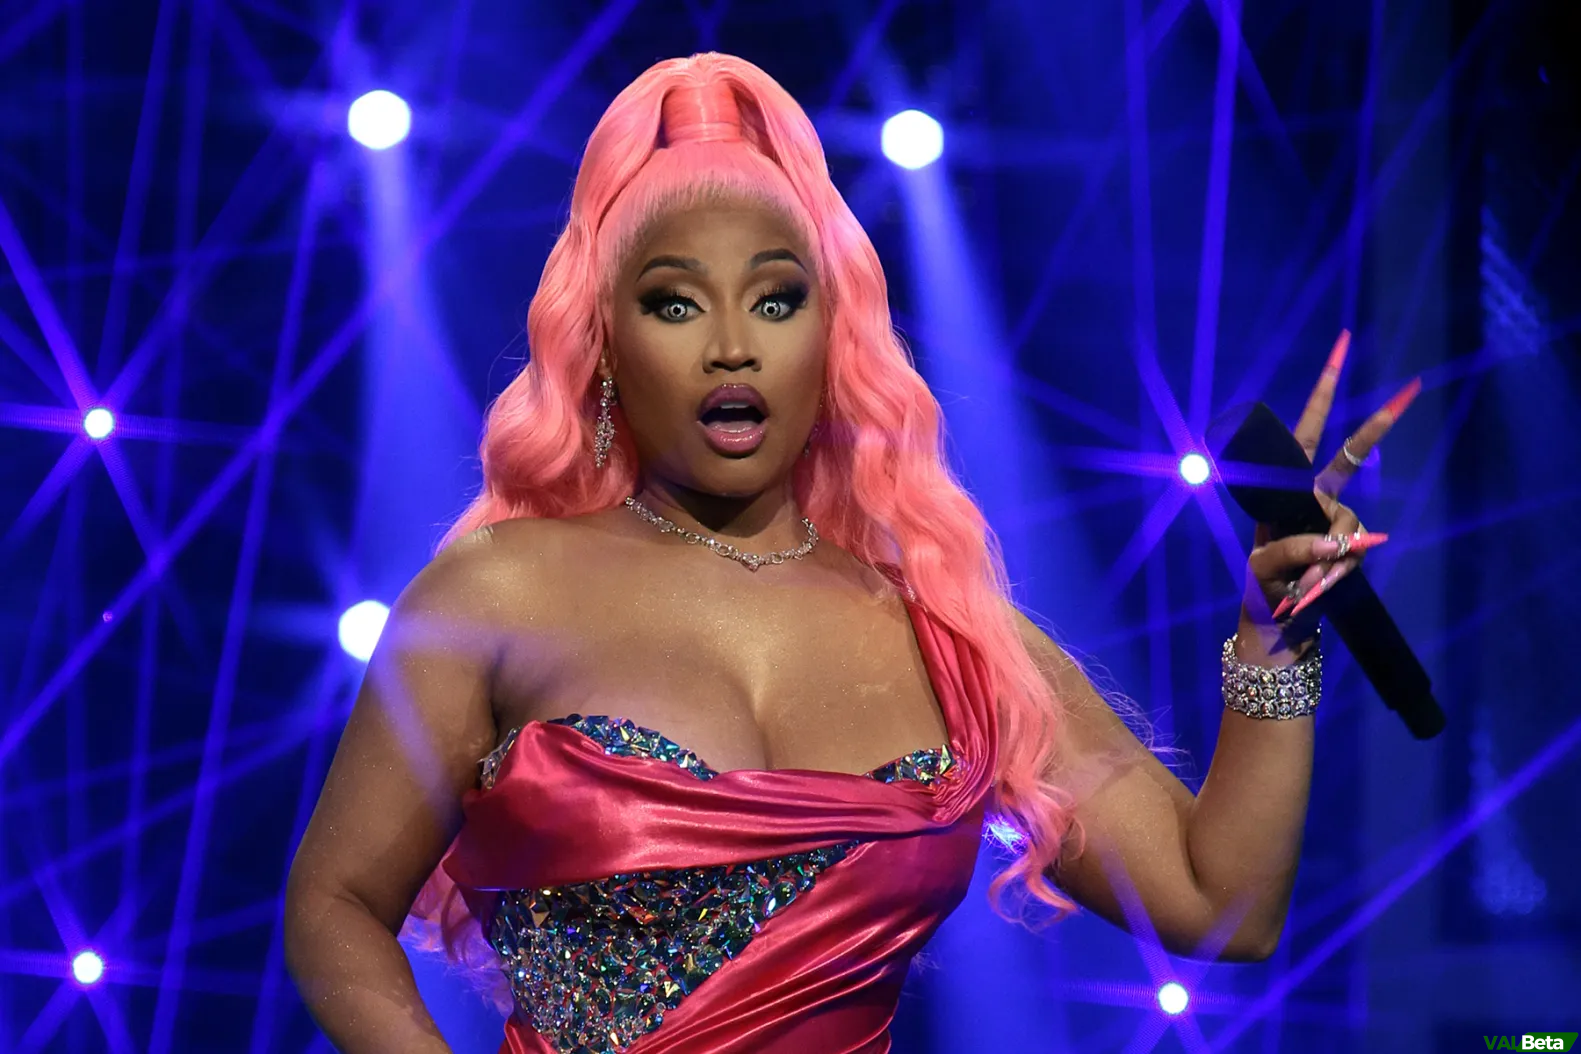 Nicki Minaj Reacts Swiftly to Audience Provocation During Performance (Video)